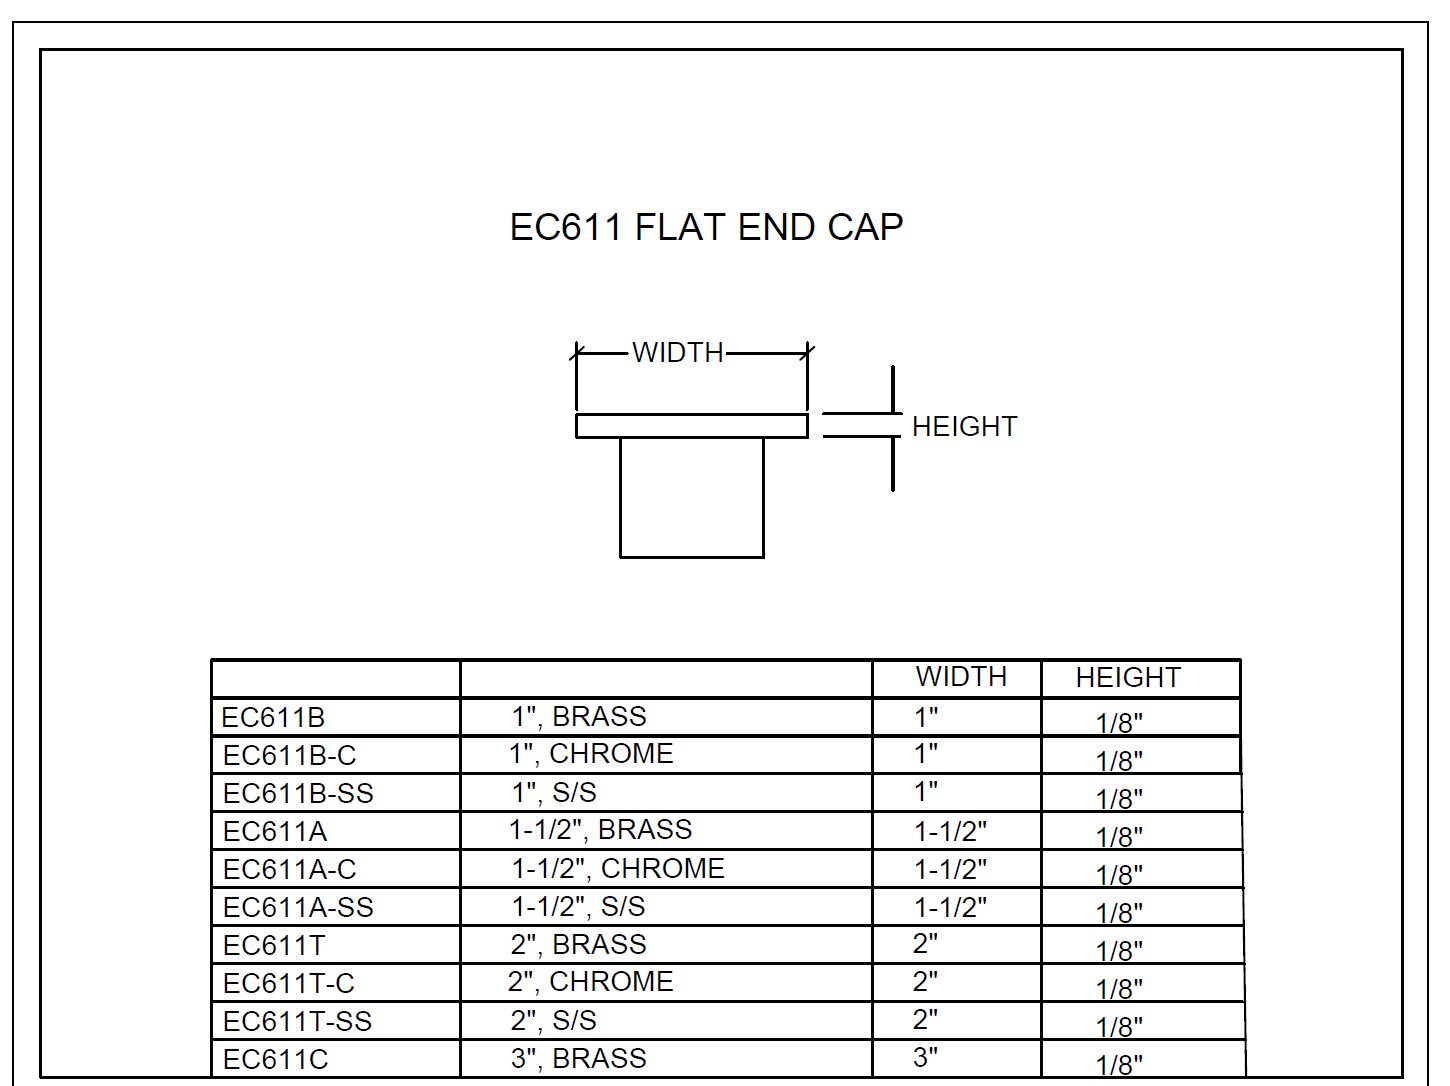 Flush Flat End Cap 1" - All finishes